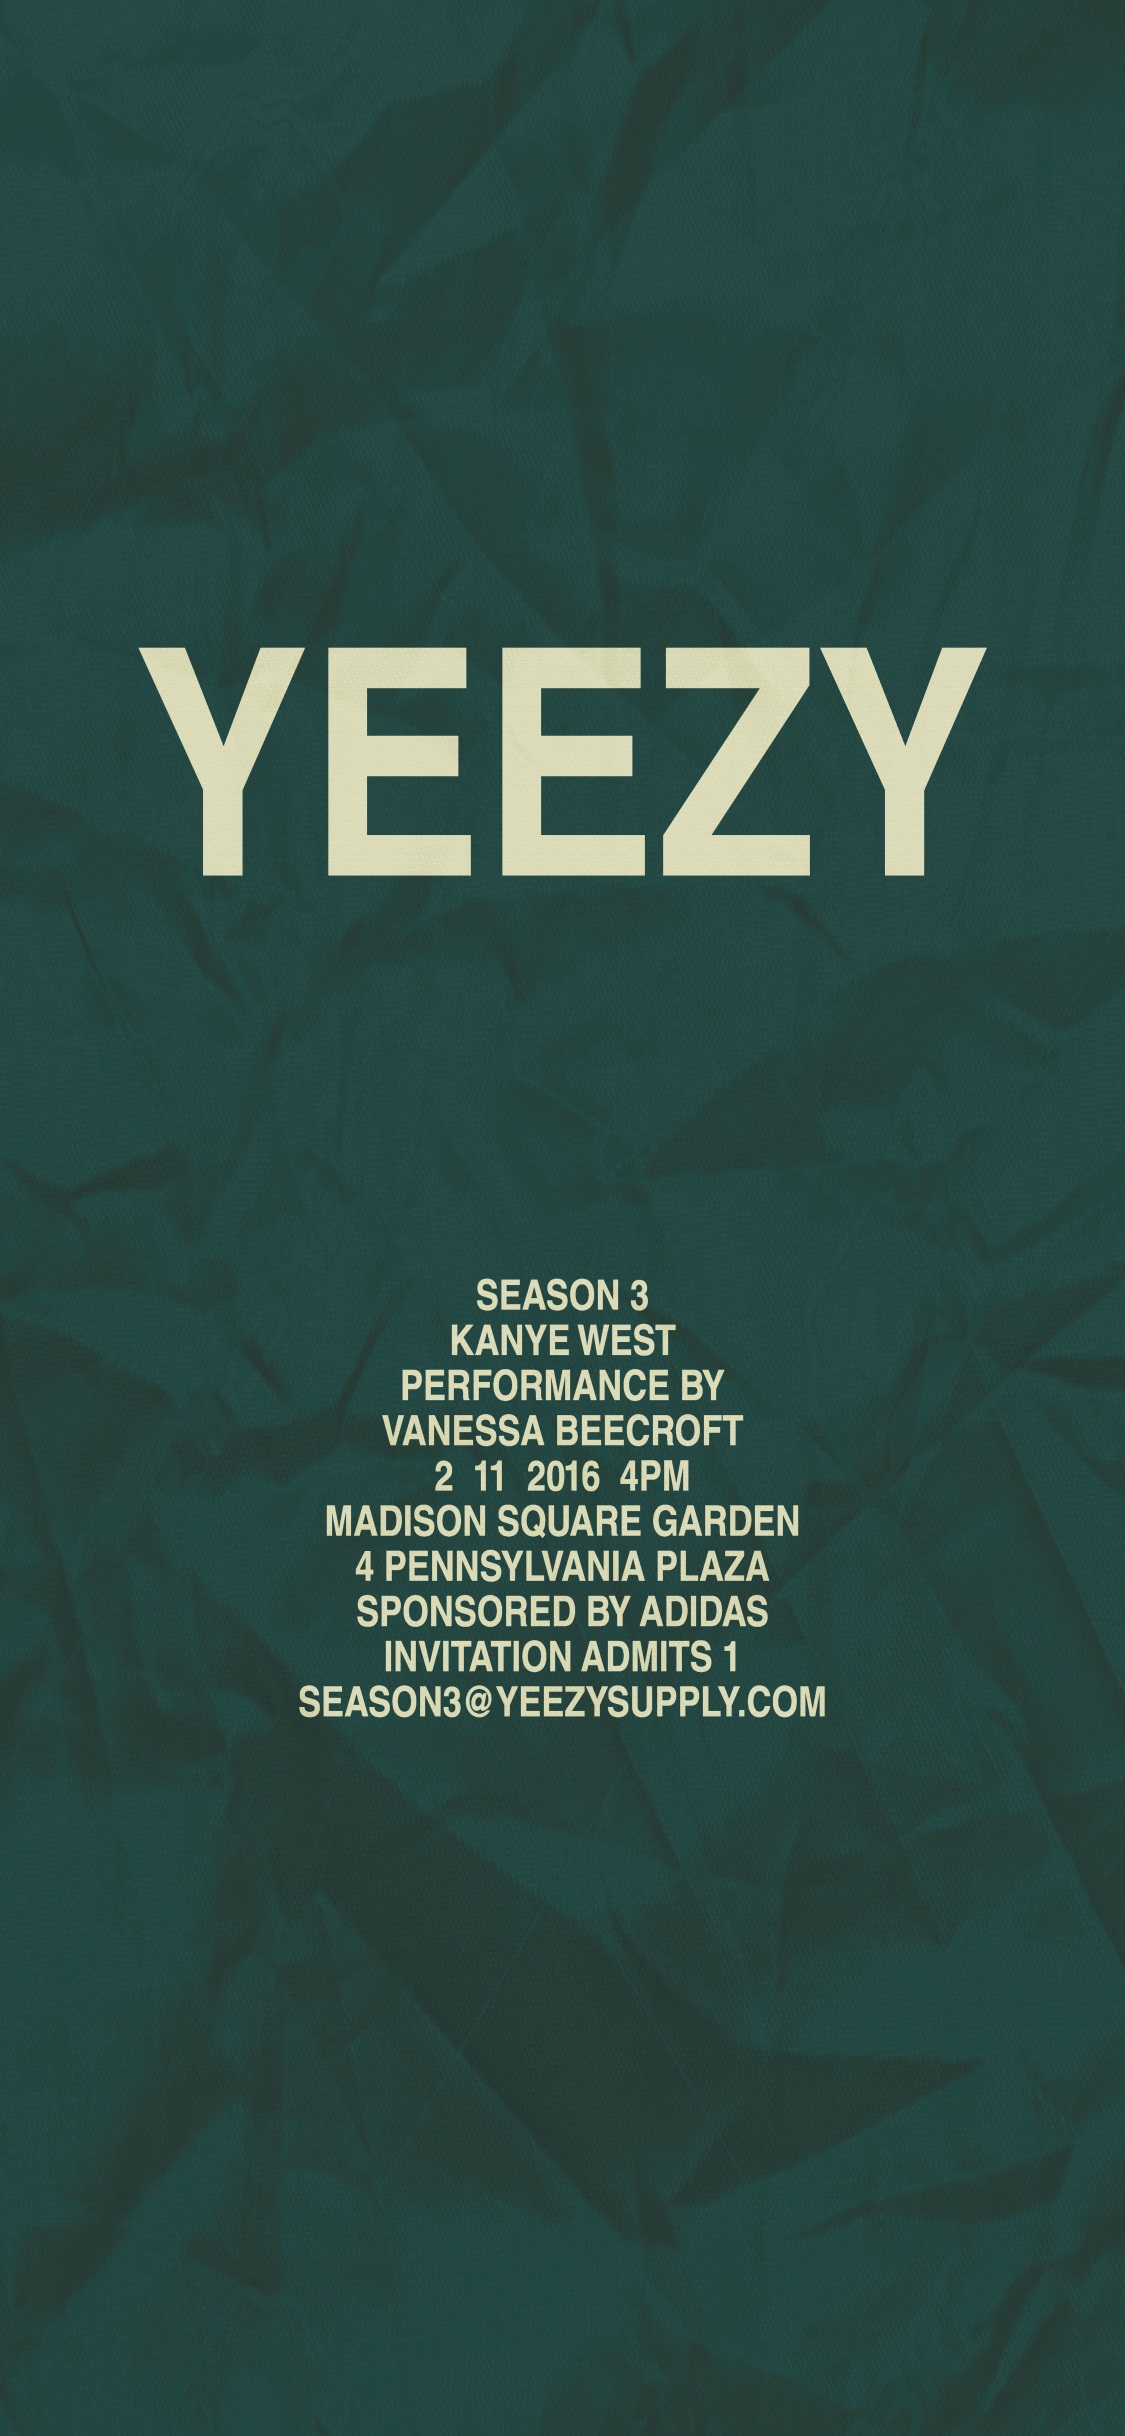 High Quality Wallpaper For Iphone - Yeezy Season Kanye West - HD Wallpaper 